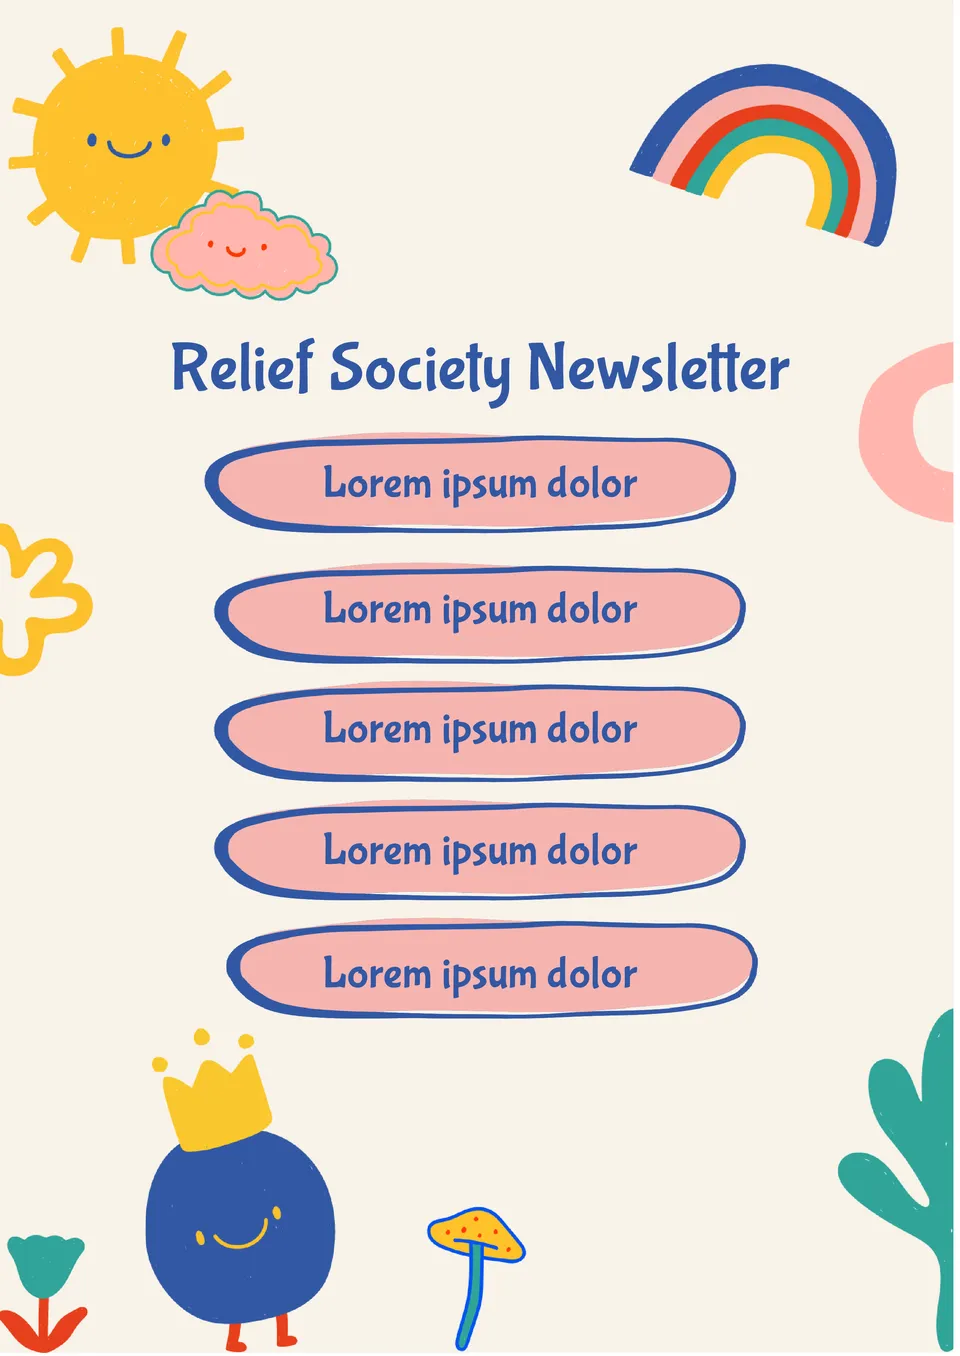 Relief Society Newsletter Template